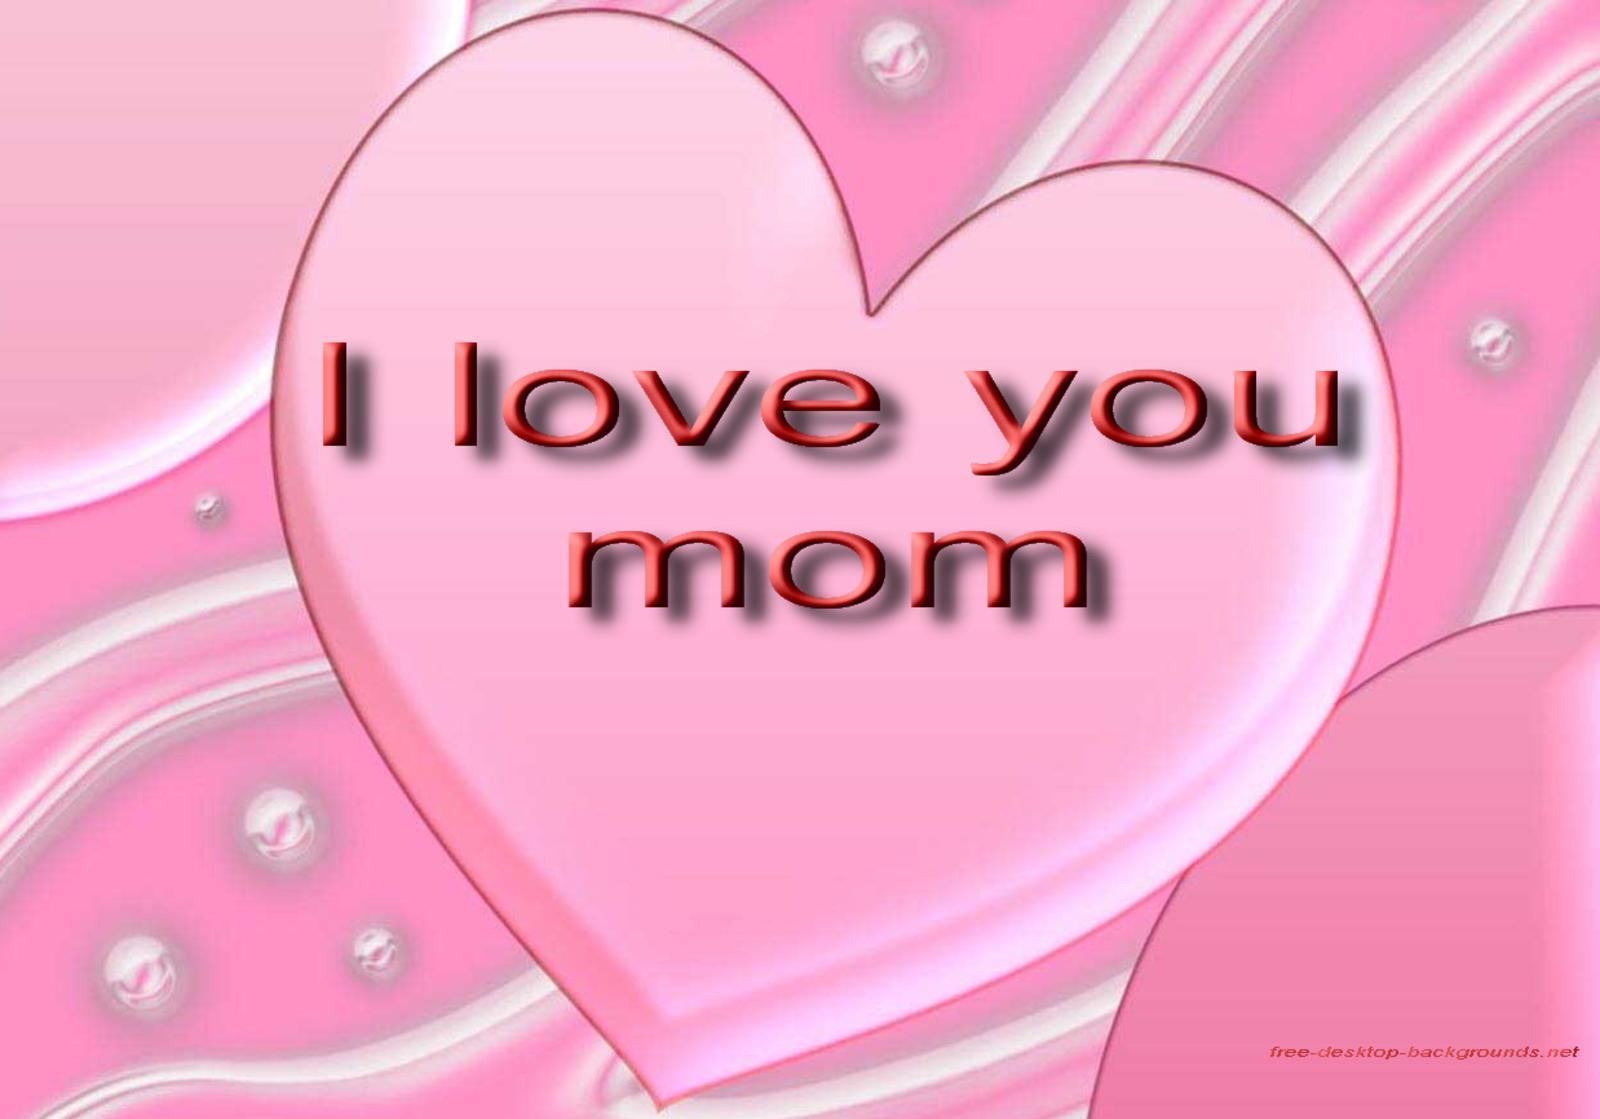 I Love You Mom Mothers Day Wallpaper. Cool Christian Wallpaper